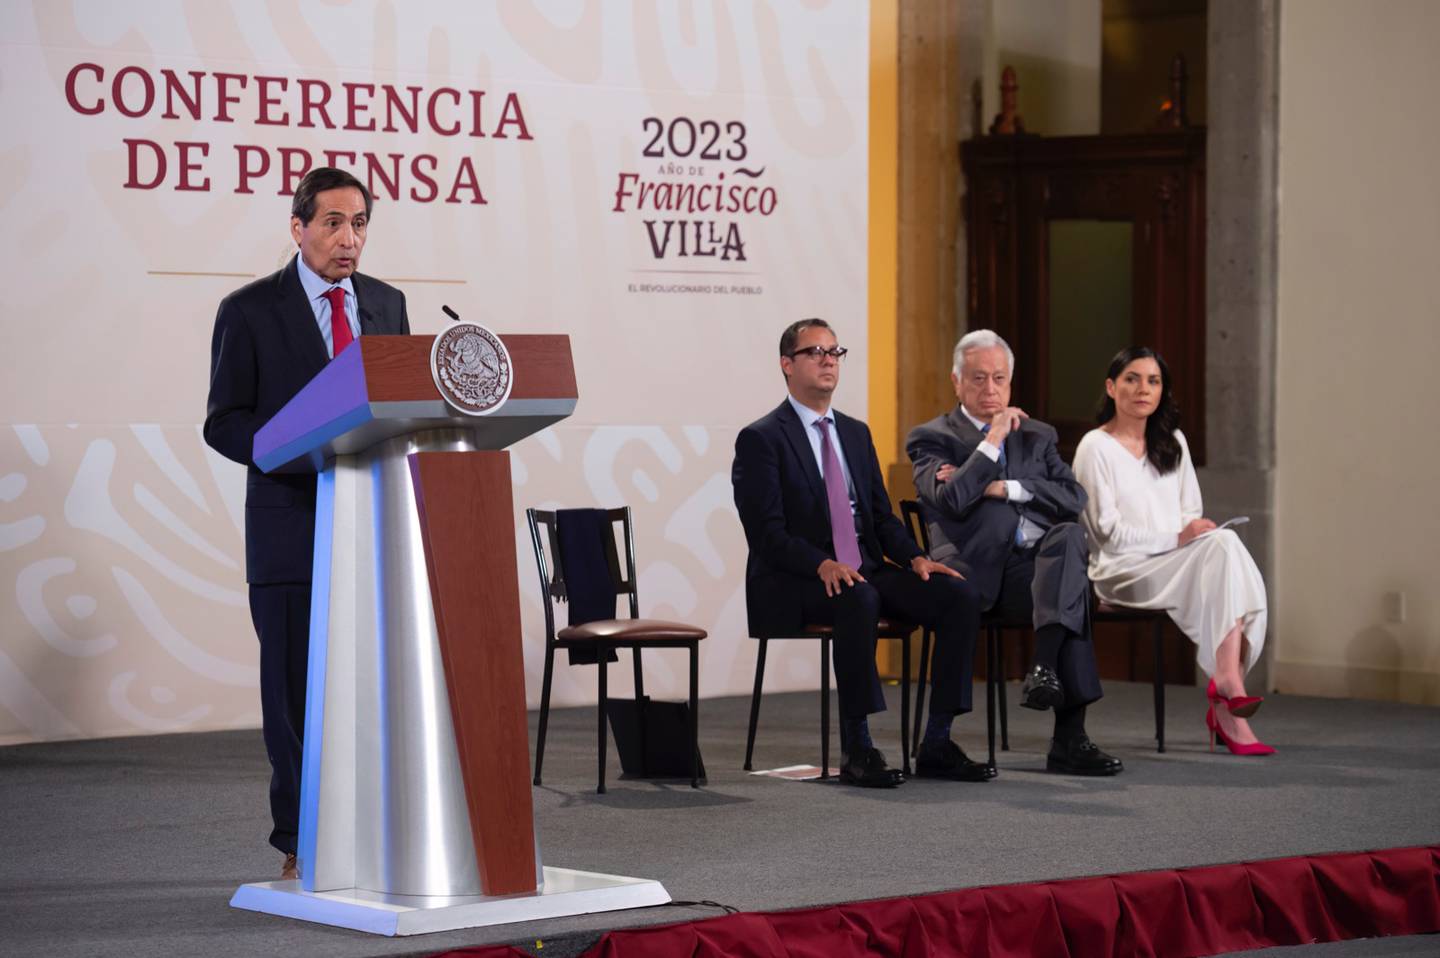 Mexico's Finance Minister Rogelio Ramírez de la O, during a press conference in Mexico City on Wednesday, April 19. Seated, from left, are deputy finance minister Gabriel Yorio; CFE chief executive Manuel Bartlett, and presidential spokesperson Elizabeth García Vilchis. (Courtest: Mexico's Presidential Office)